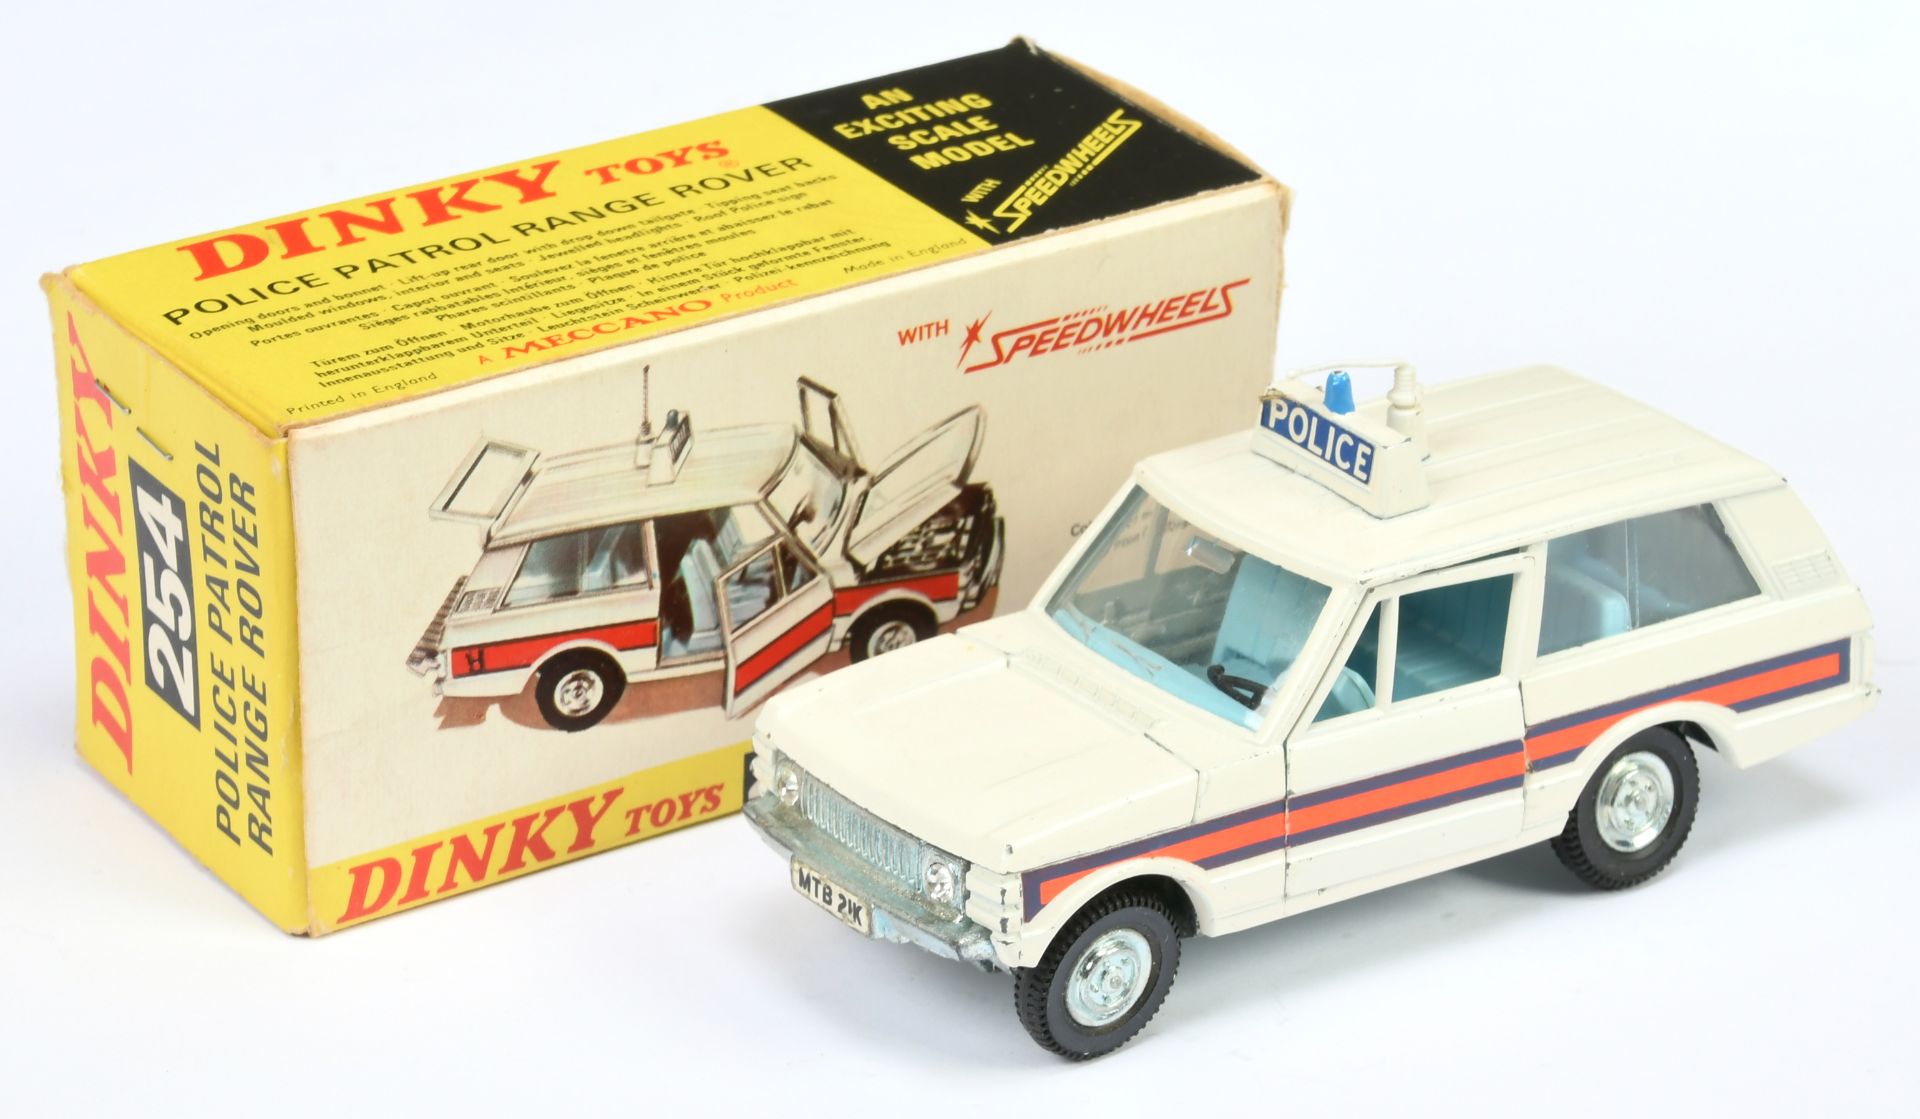 Dinky Toys 254 Range Rover "Police" - White body, light blue interior, roof box and plastic aeria...